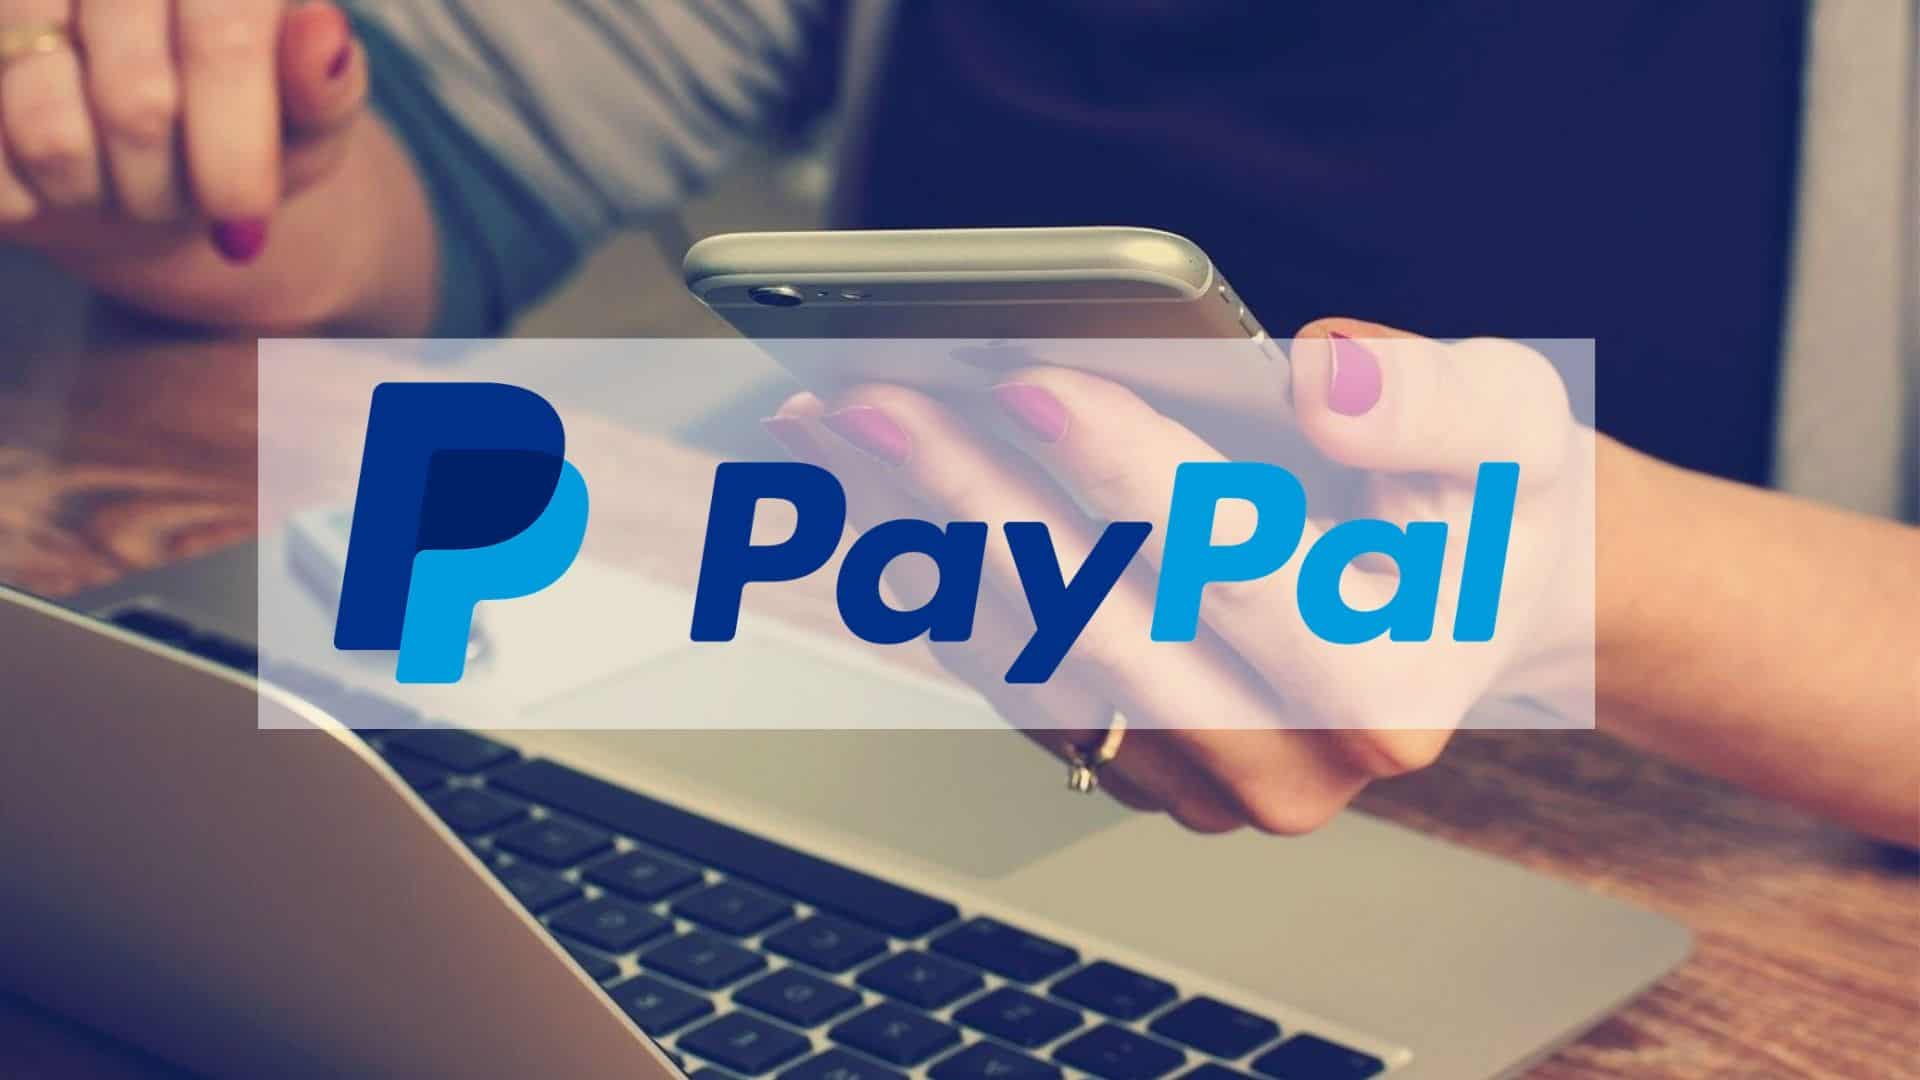 How to Login to Paypal Account: Complete Guide to Logging in Paypal